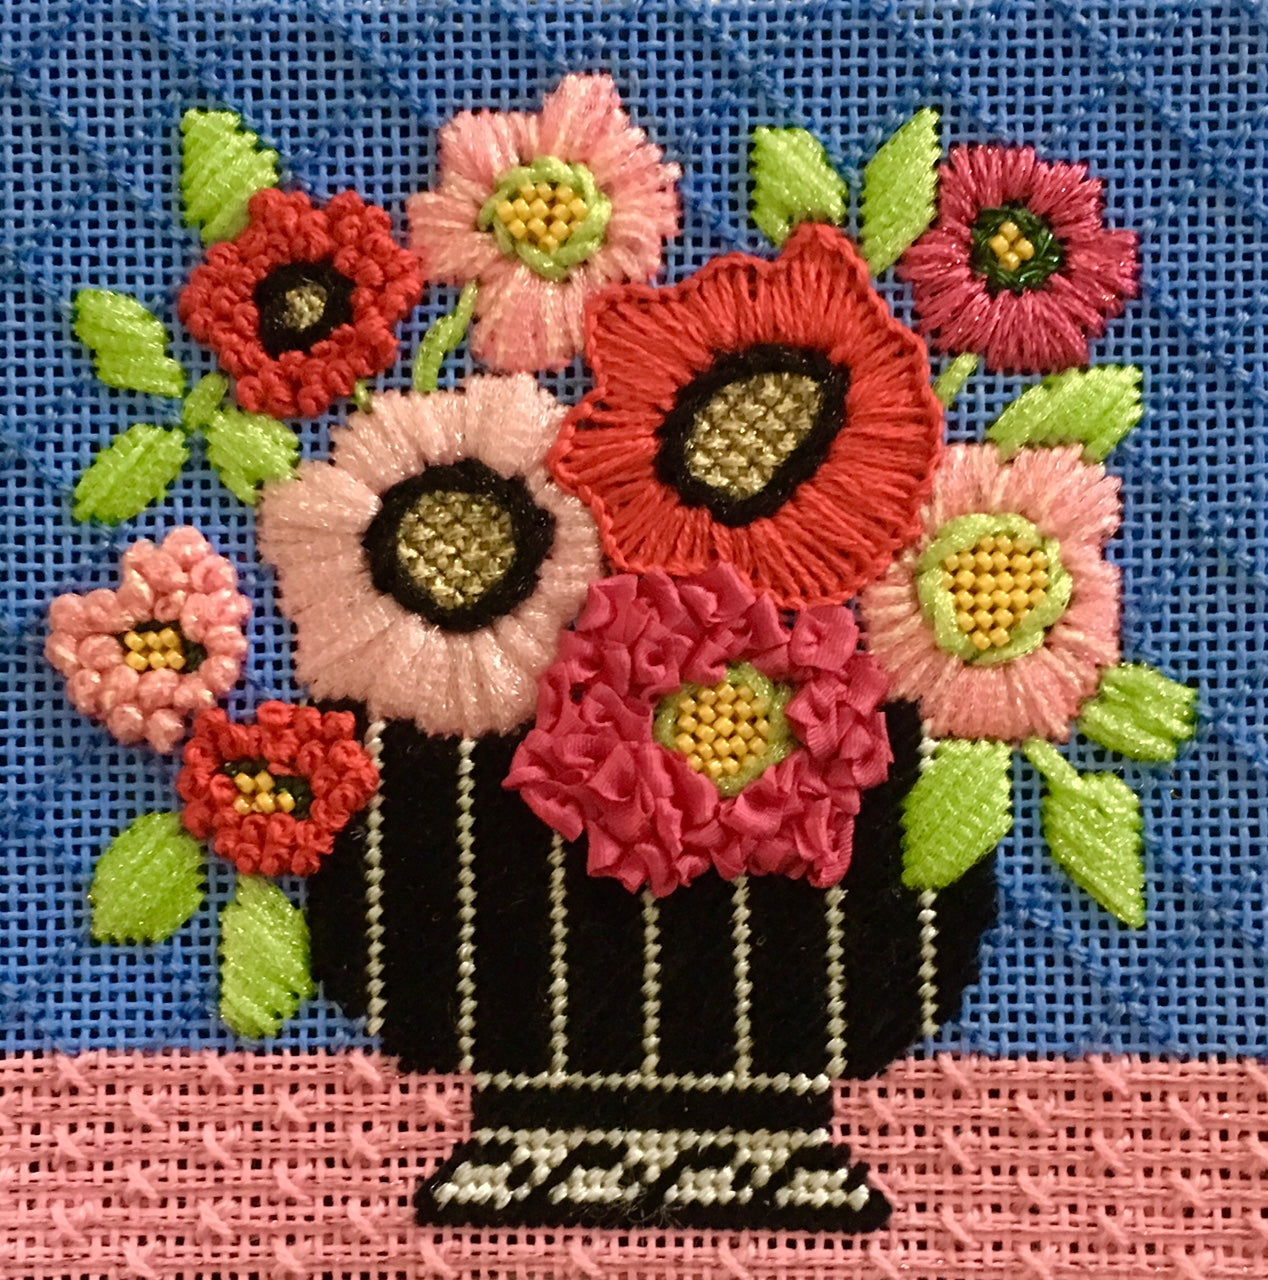 Stitched example of the pink mod flowers coaster needlepoint canvas from Amanda Lawford and Vallerie Needlepoint Gallery